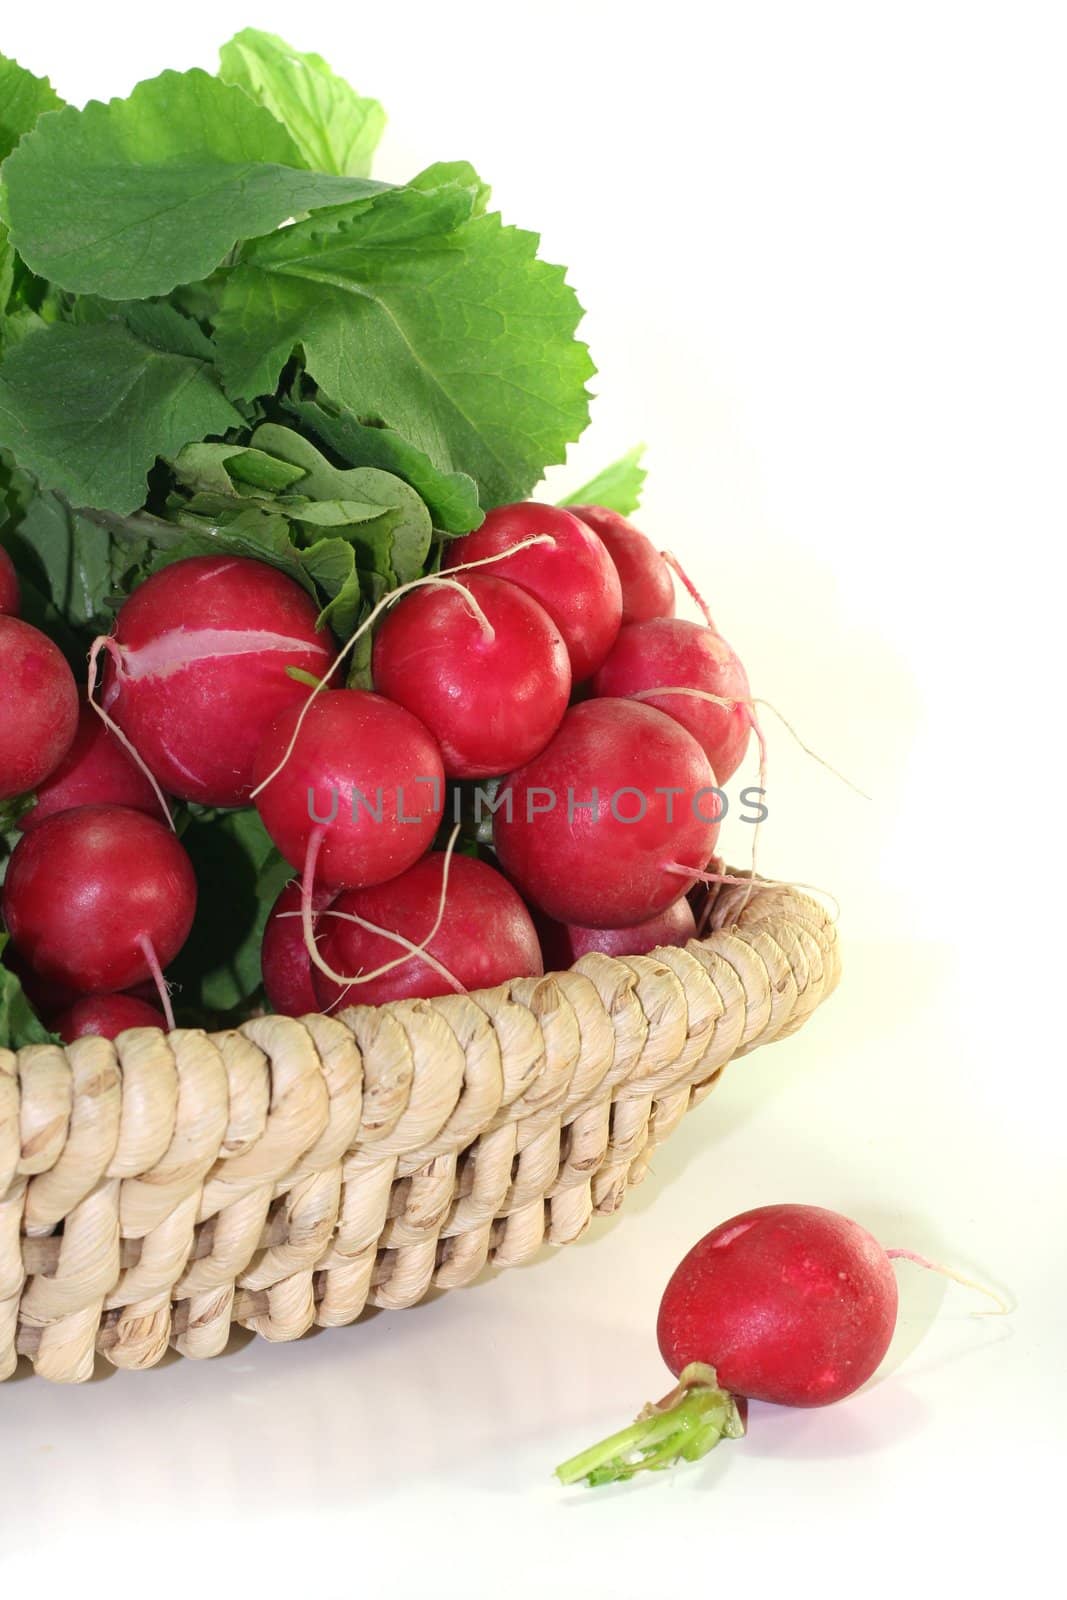 Radishes by discovery